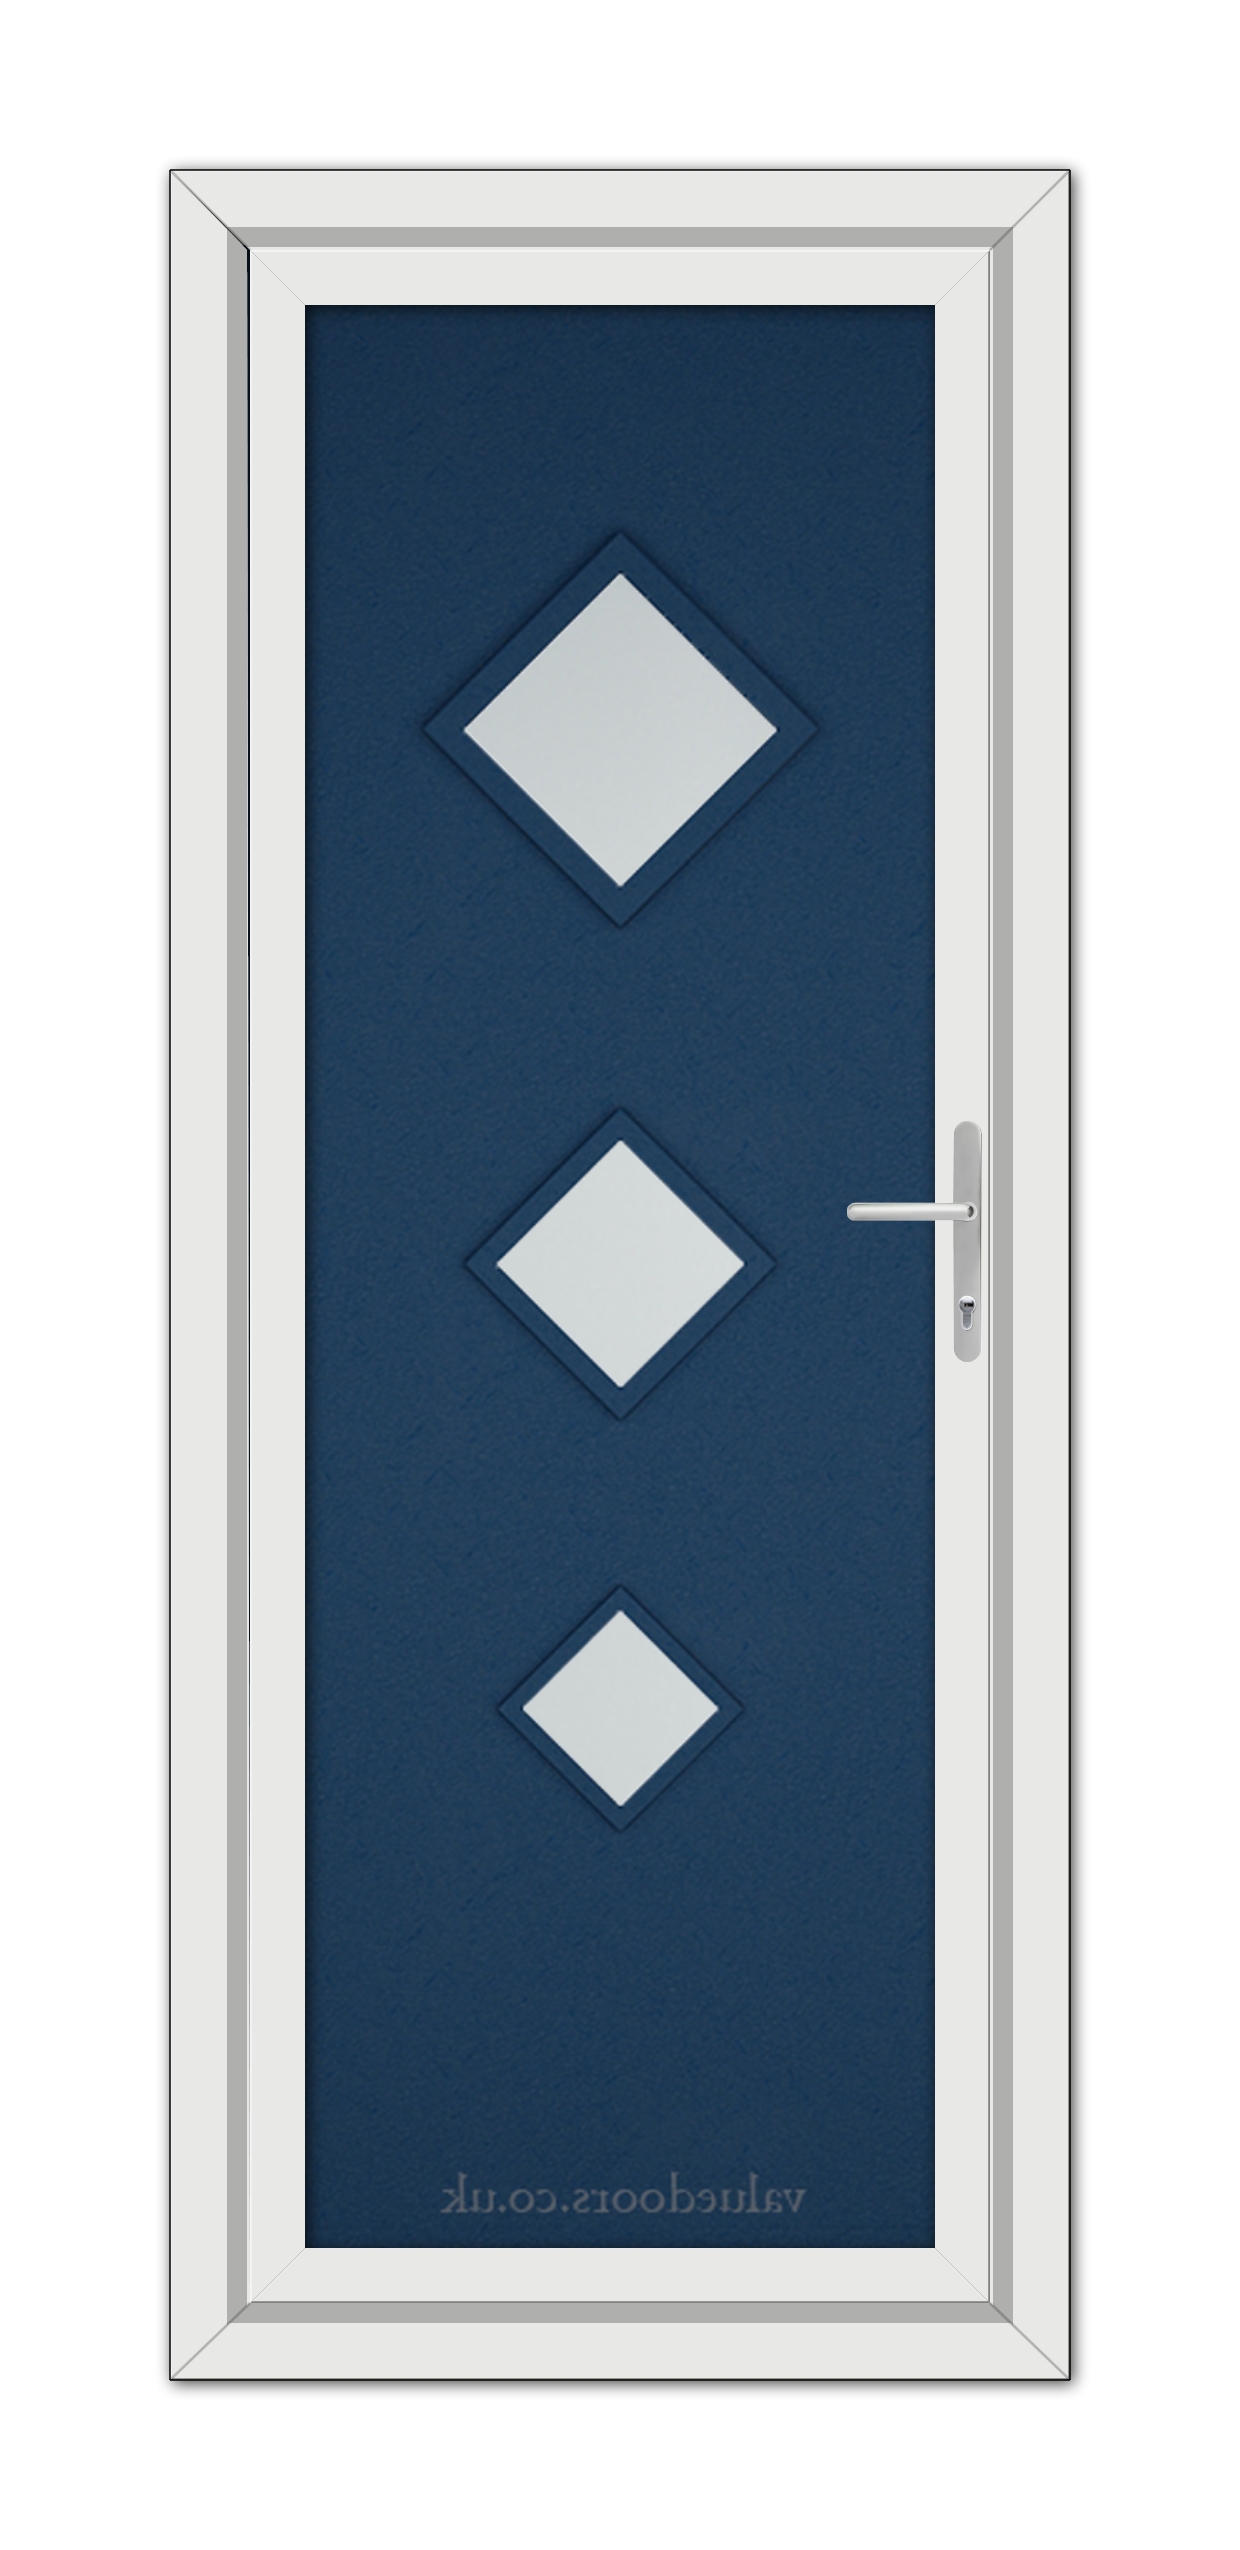 A Blue Modern 5123 uPVC door with three diamond-shaped windows, encased in a white frame, featuring a steel handle on the right side.